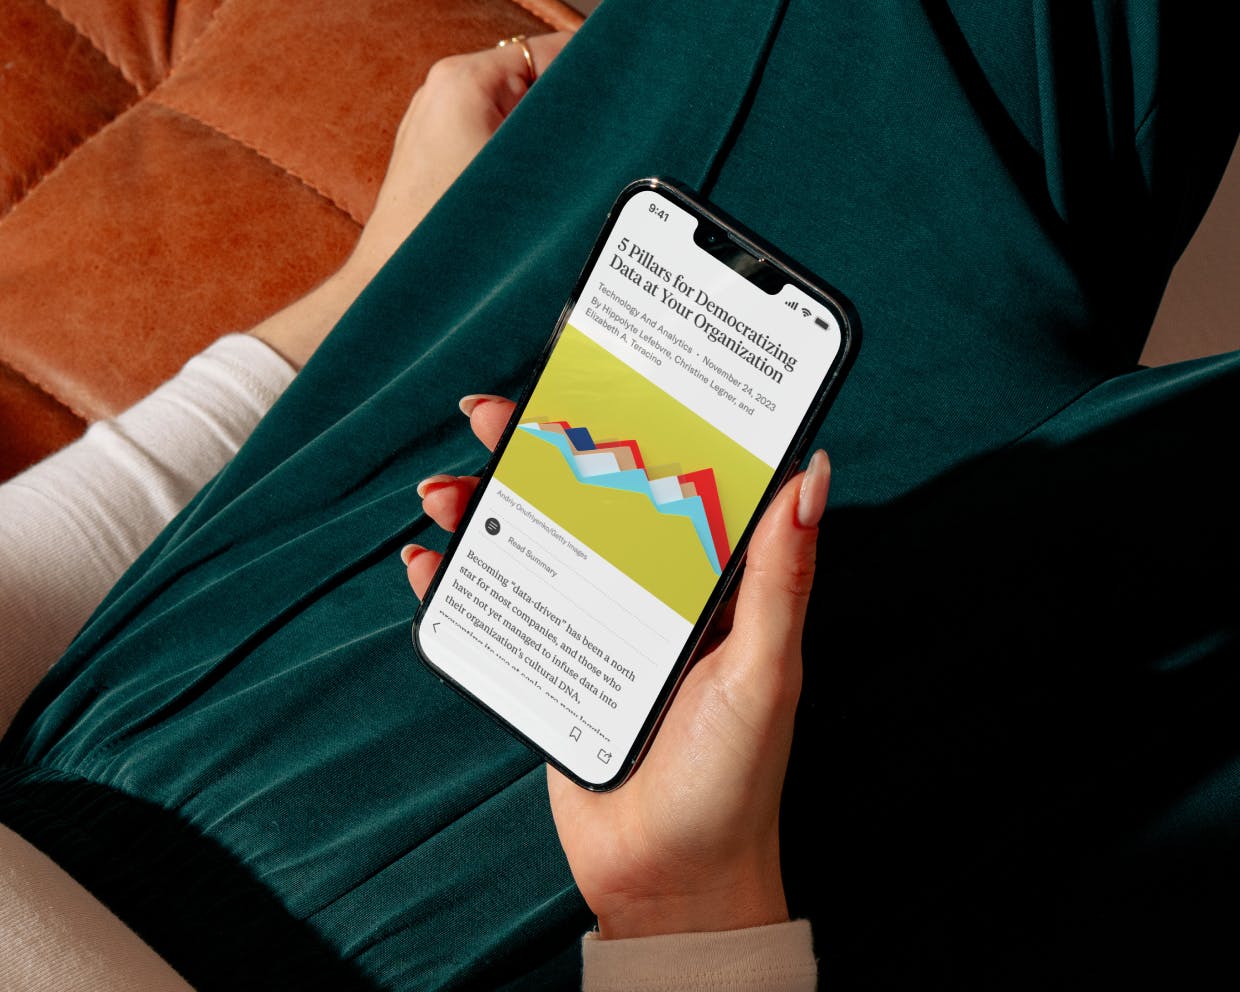 A person holding a phone with the Harvard Business review screen